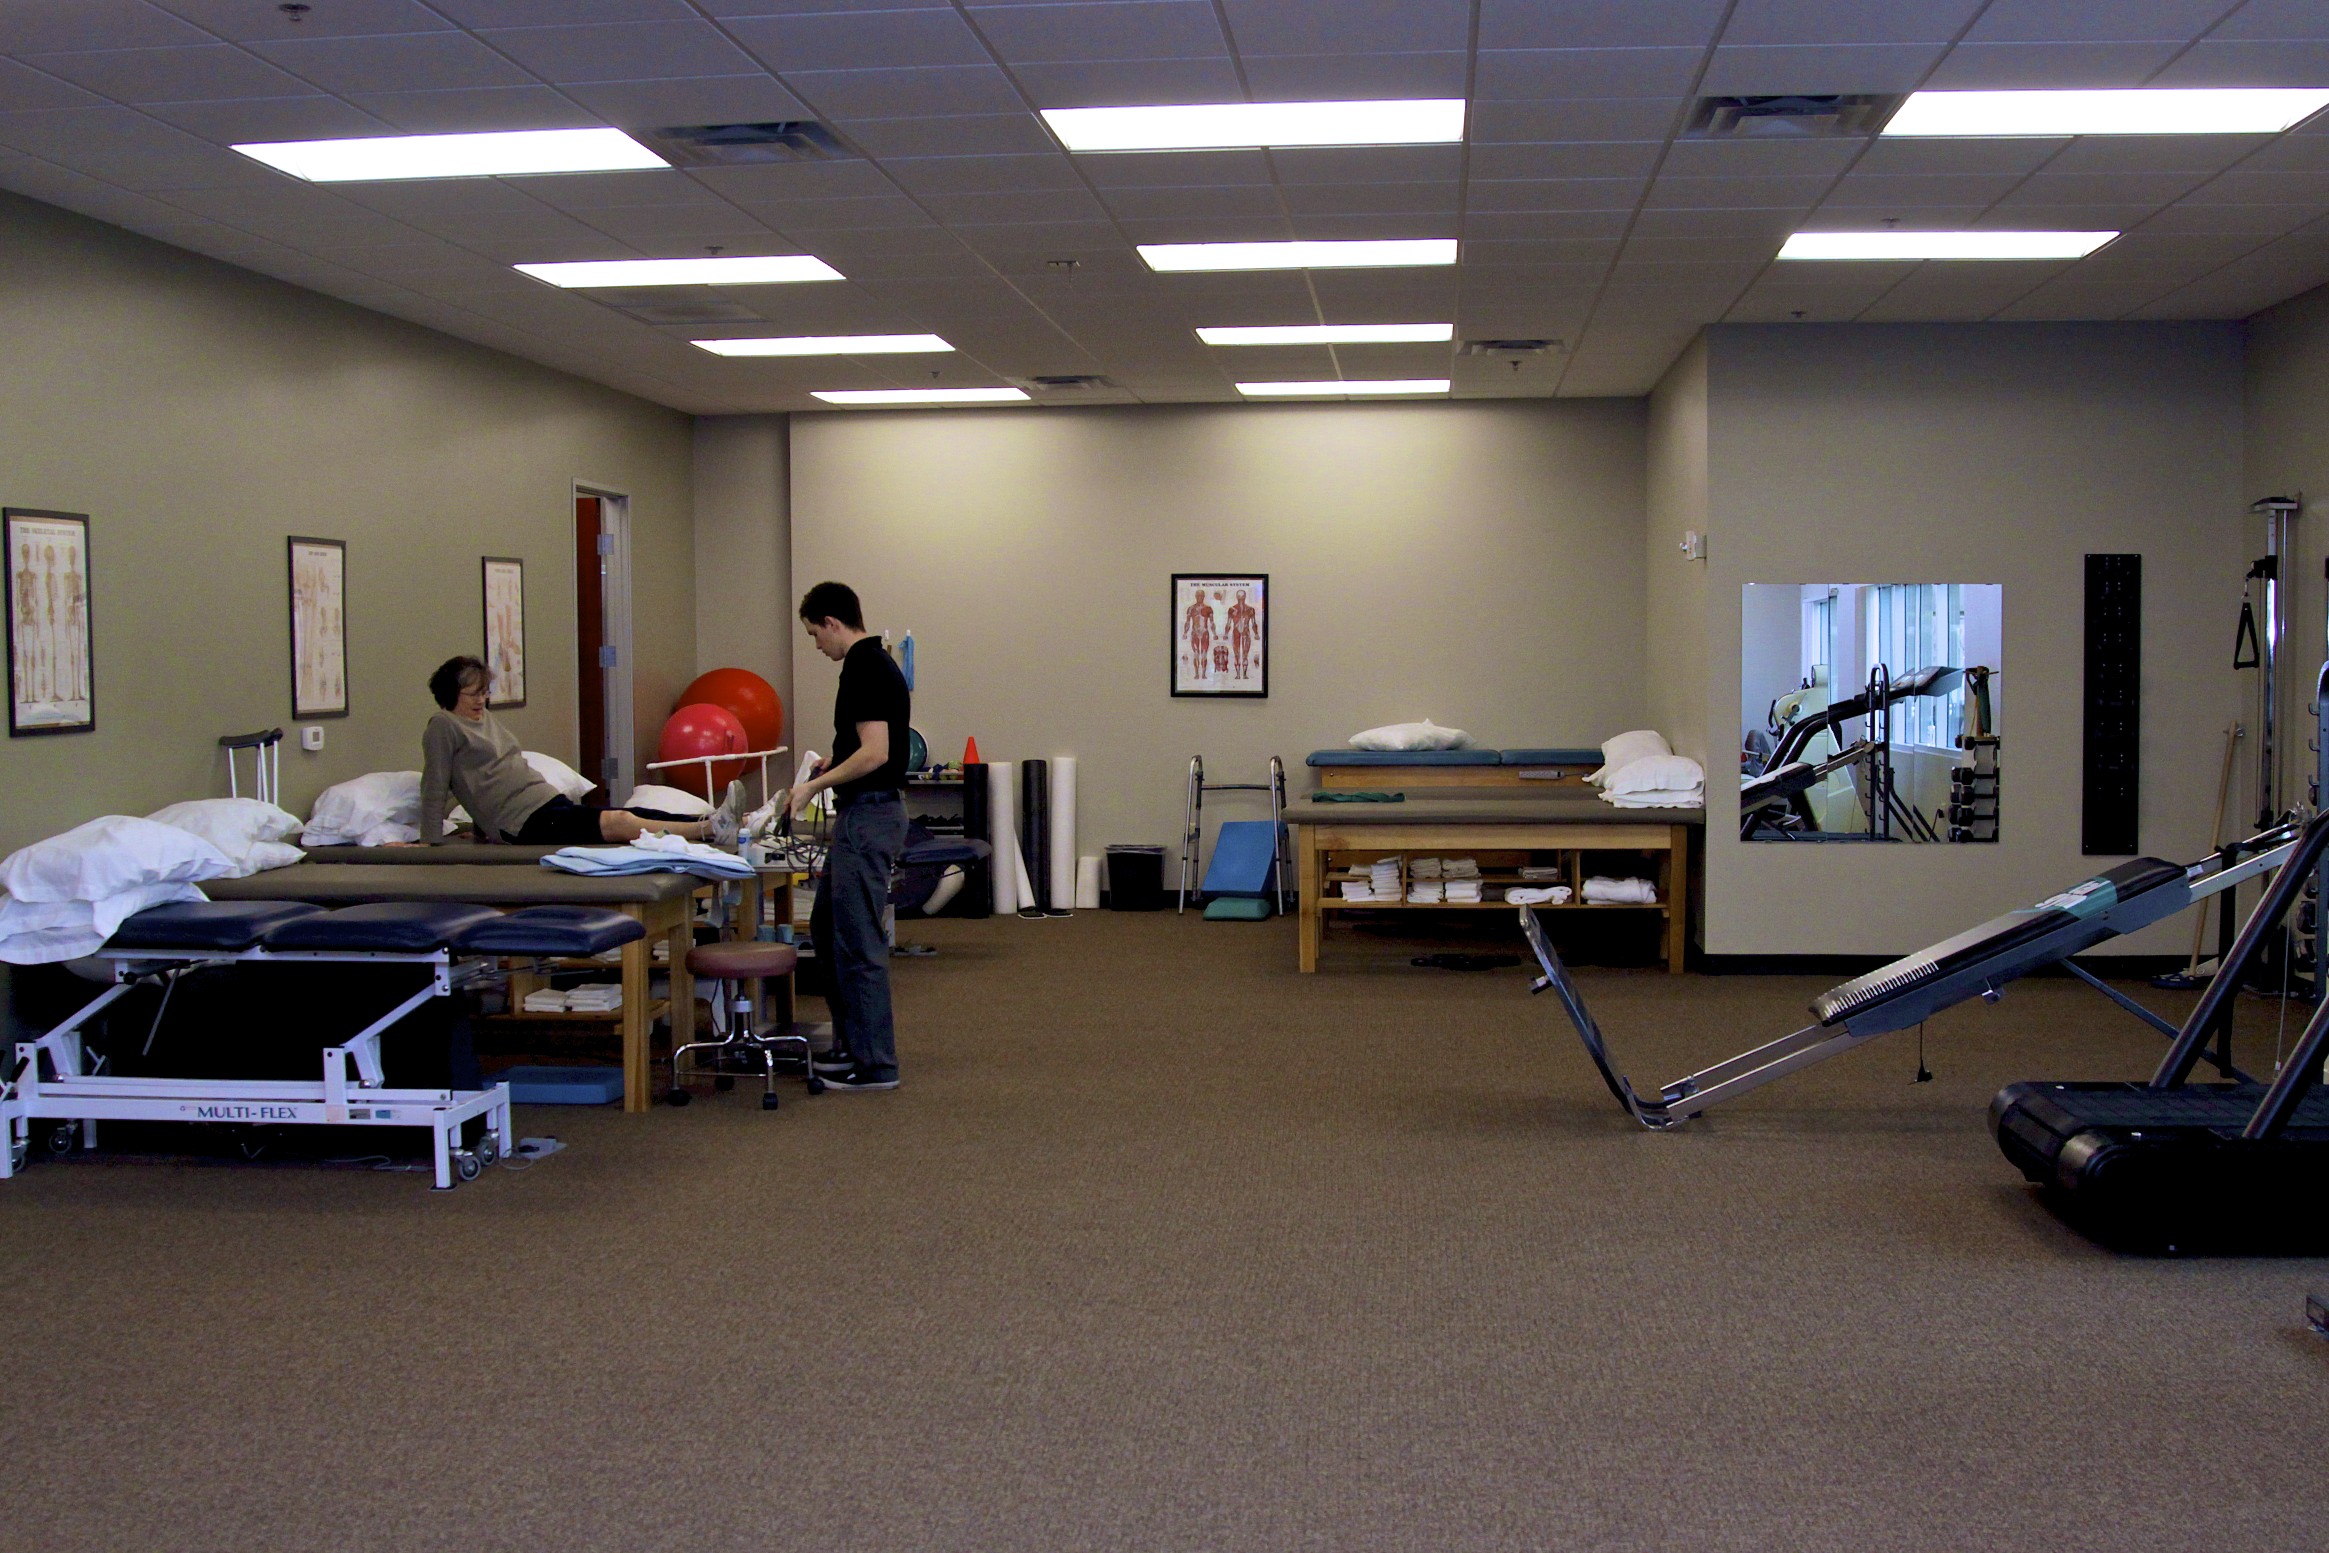 Chandler Physical Therapy